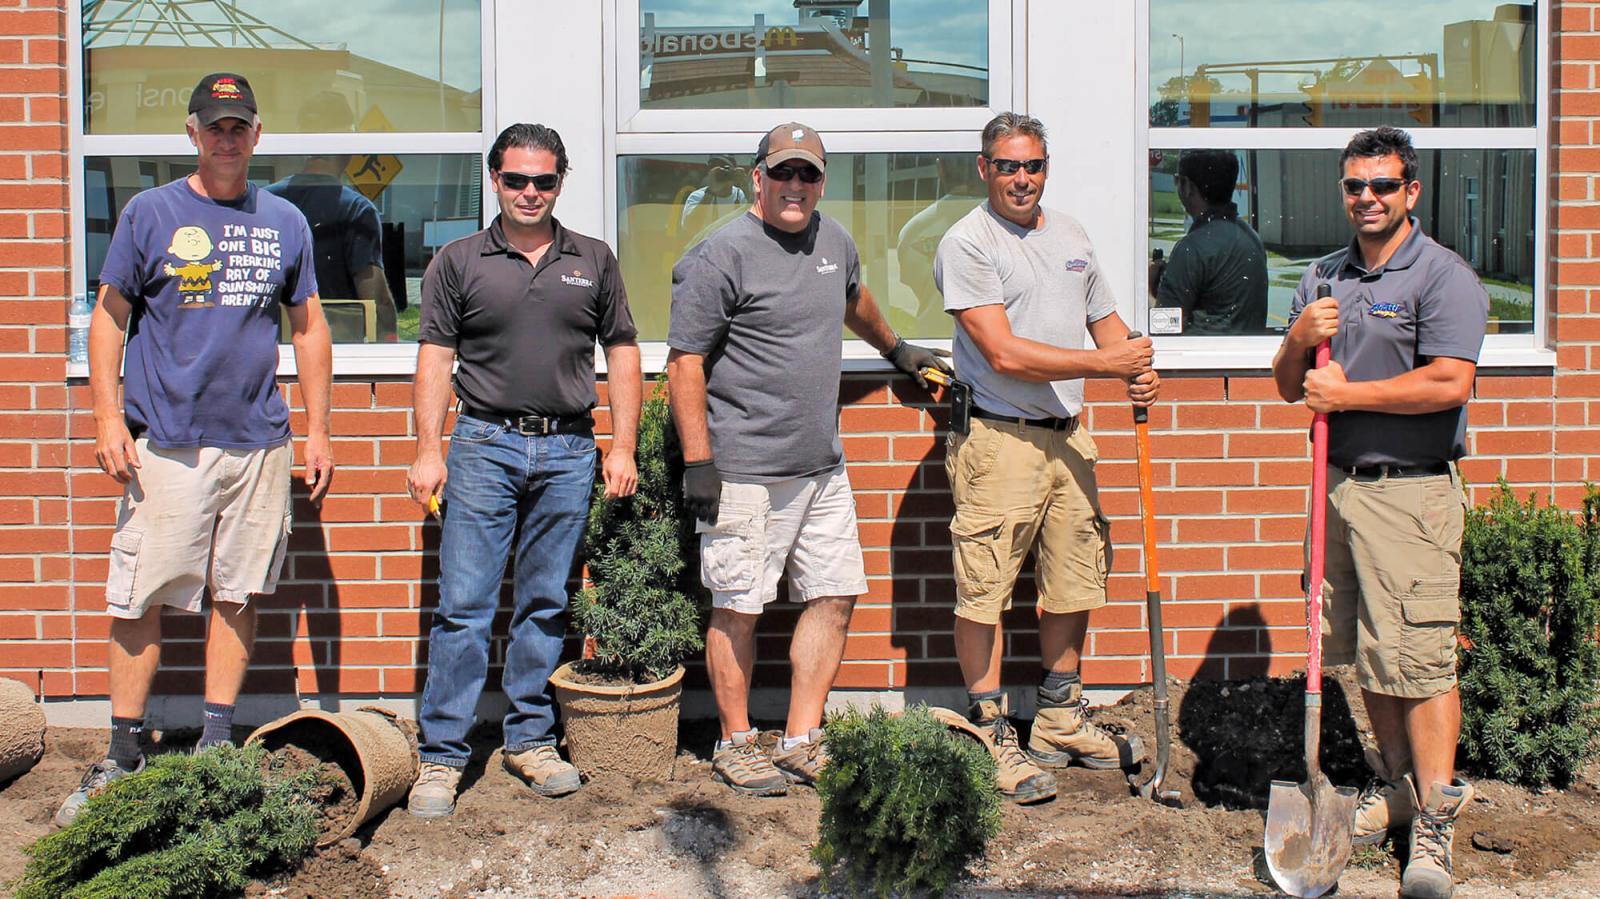 Members of Windsor Chapter lent their creative talents to improve the Safety Village of Windsor. In photo, from left, are some of those members, Dan Garlatti, Joe Santarossa Jr., Chris Power, Darren O’Grady and Sal Costante.